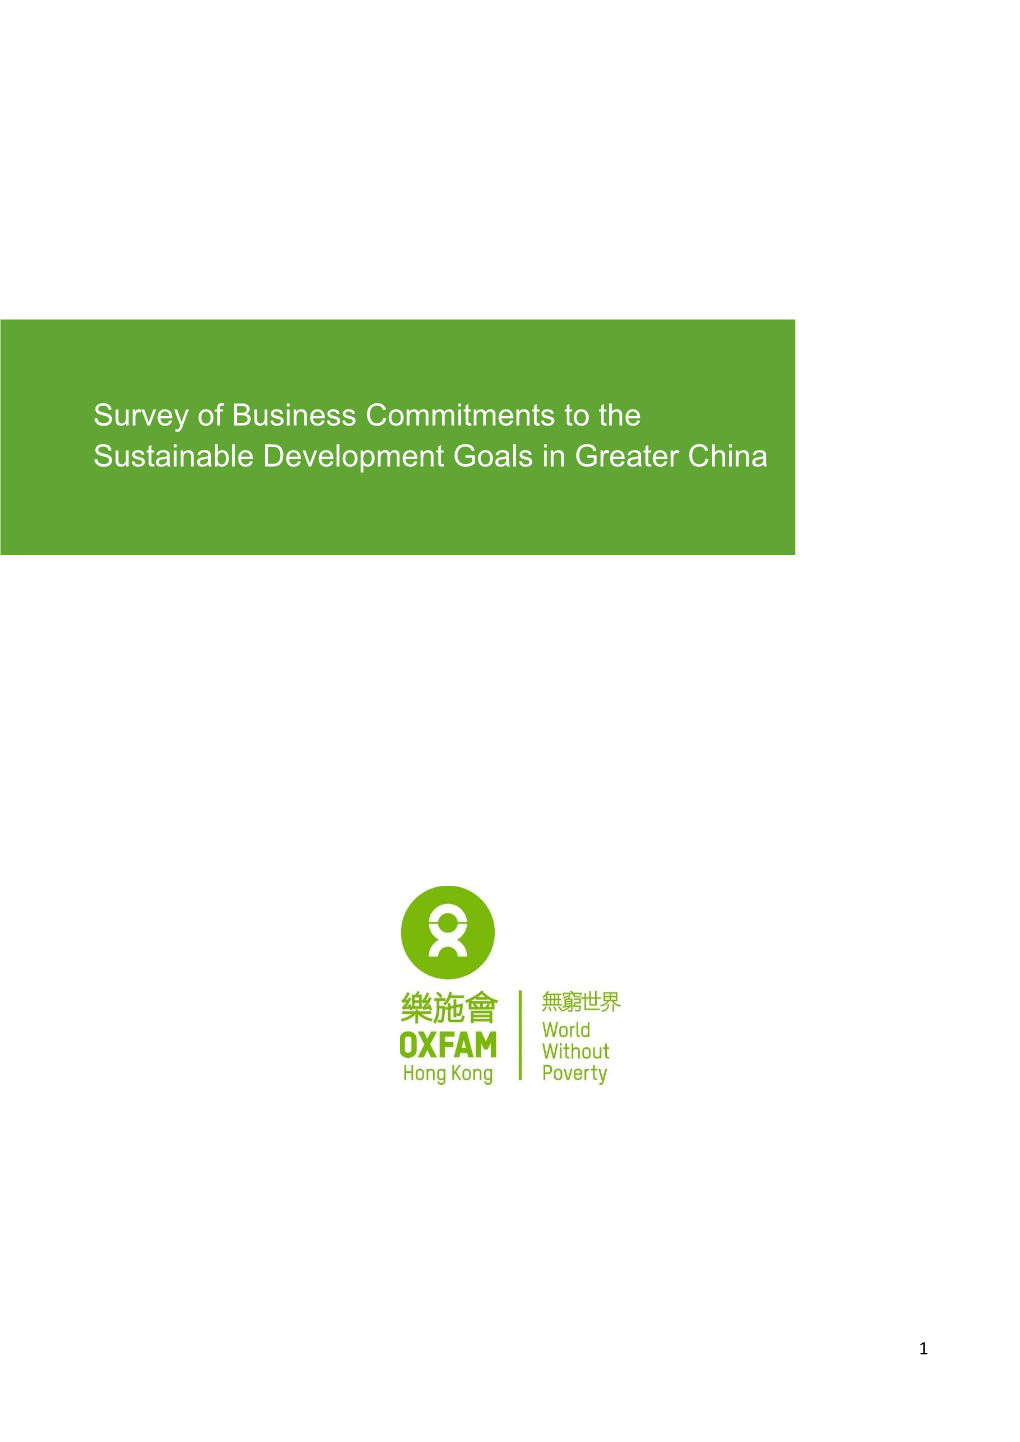 Survey of Business Commitments to the Sustainable Development Goals in Greater China